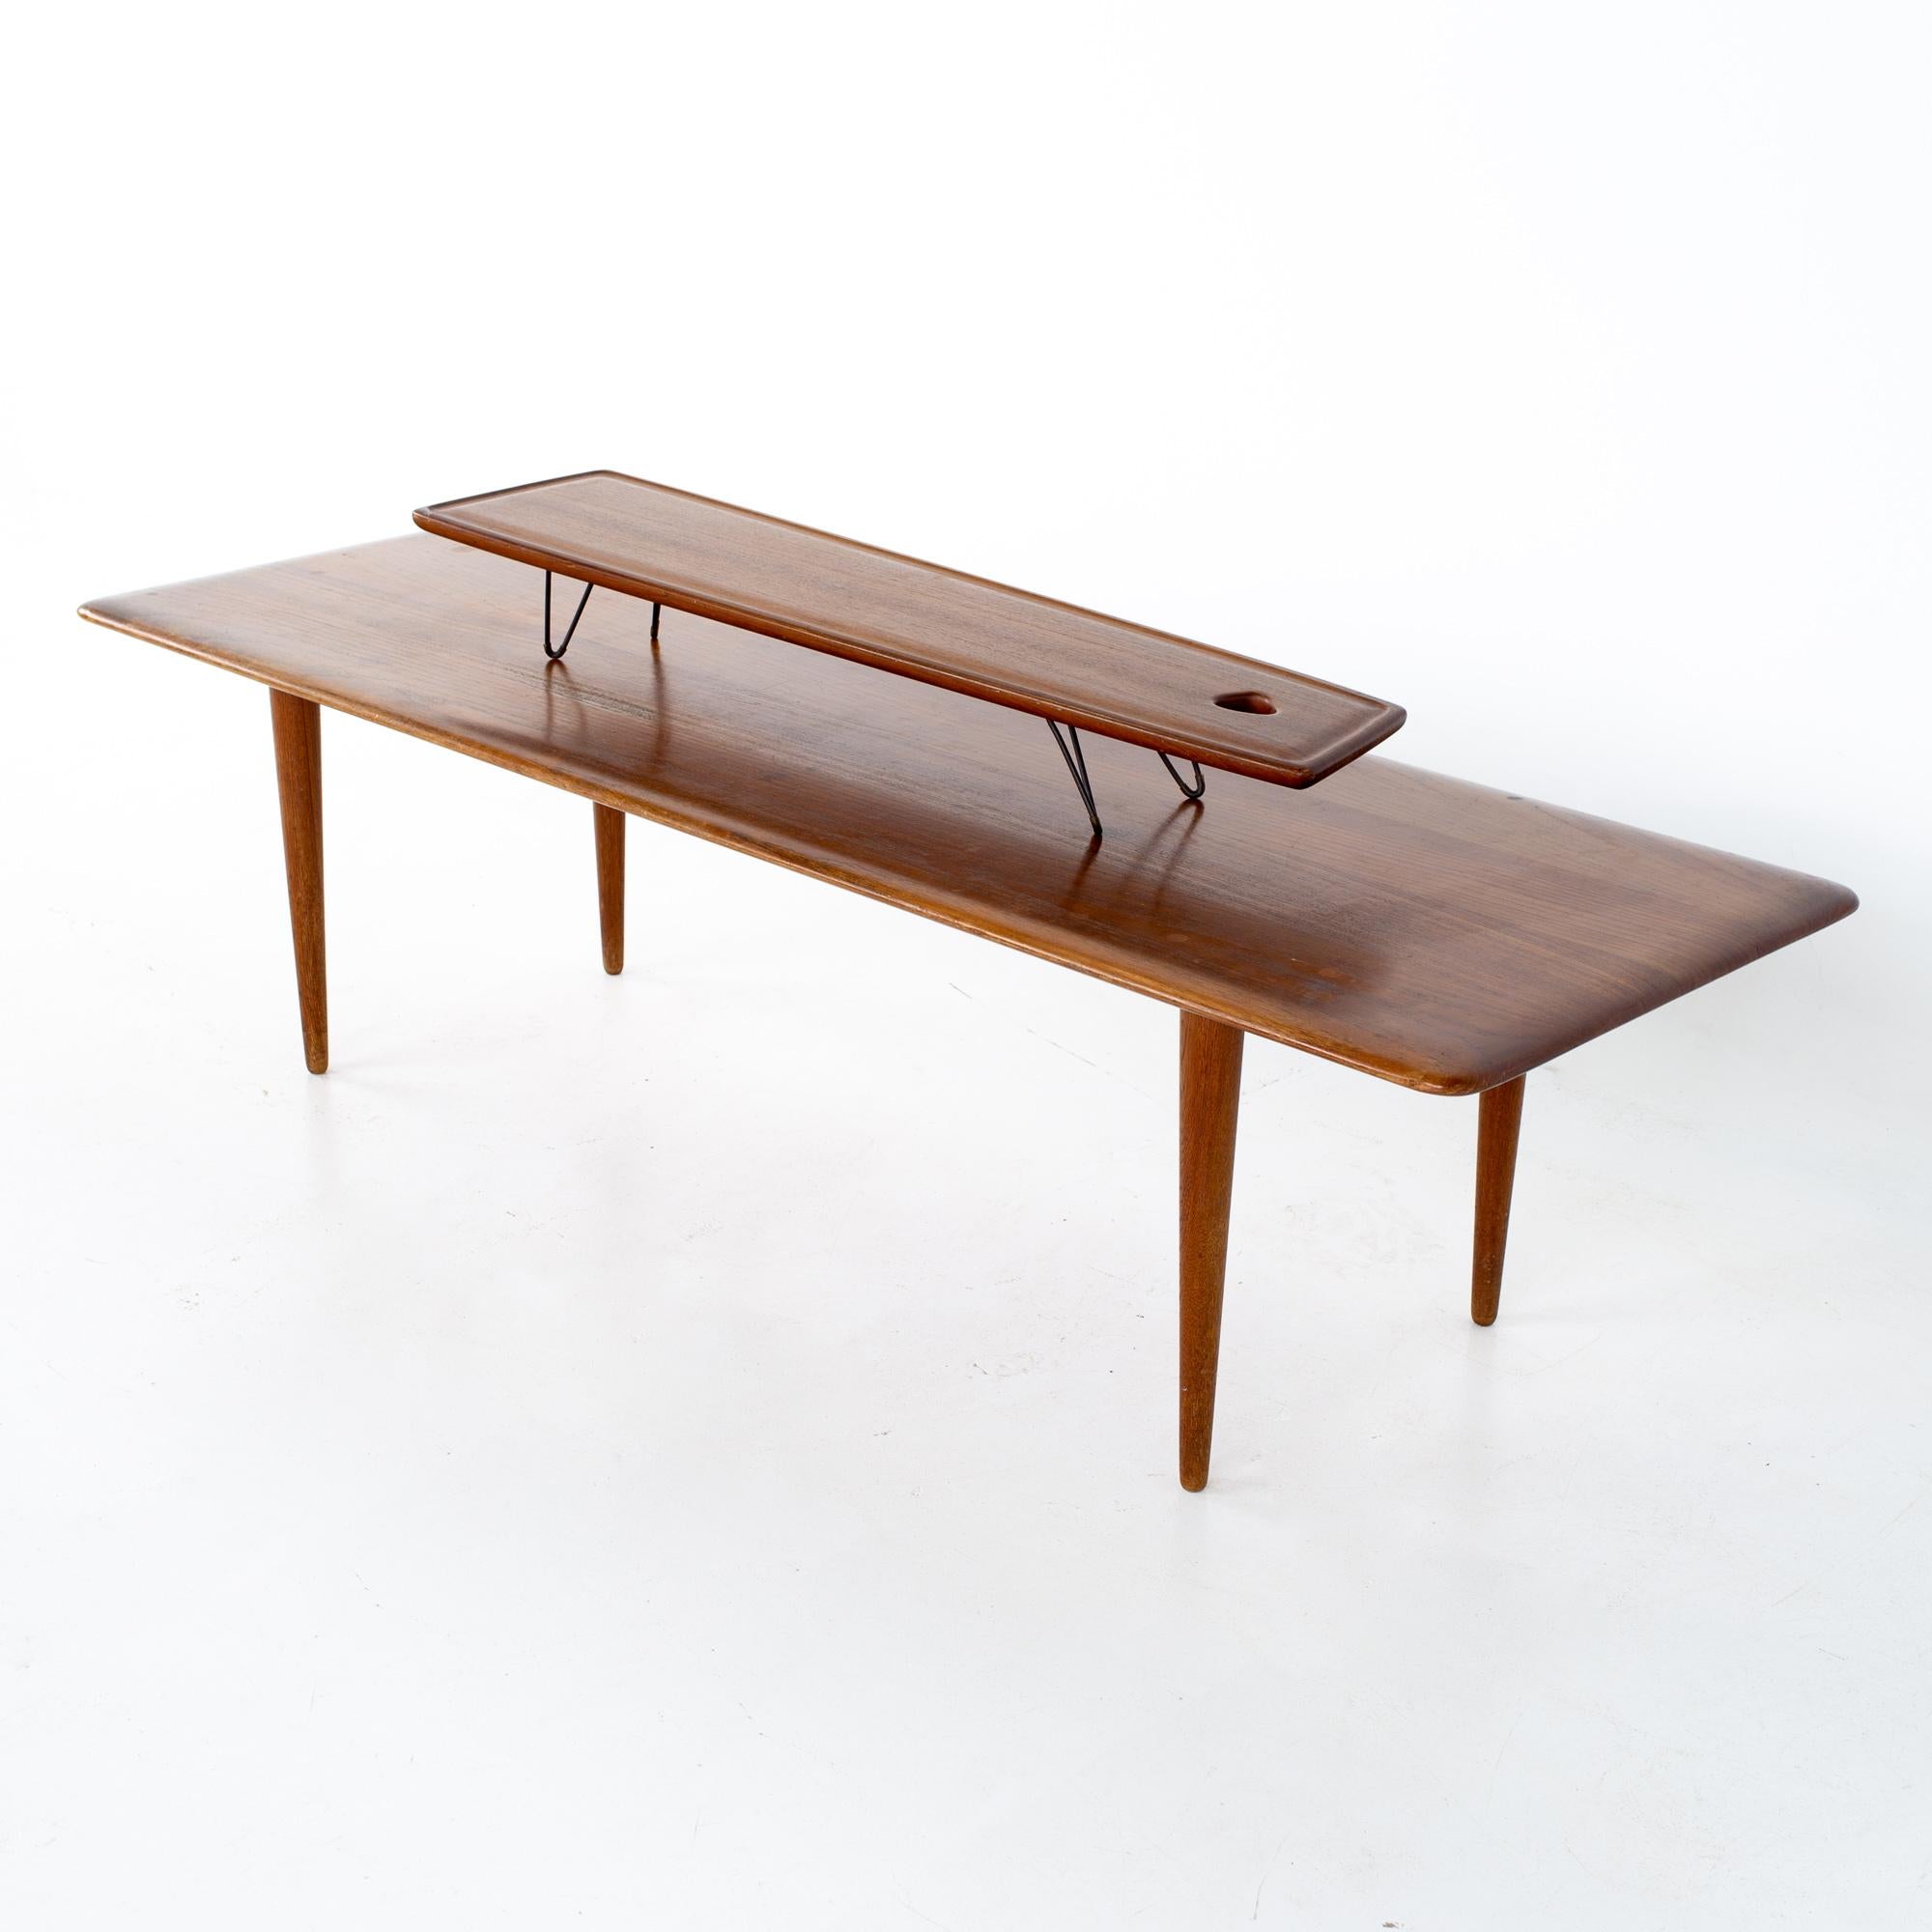 Peter Hvidt and Orla Molgaard Nielsen mid century teak coffee table.
Coffee table measures: 60 wide x 20 deep x 15.75 inches high
Smaller table measures: 37 wide x 8 deep x 4.5 inches high

All pieces of furniture can be had in what we call